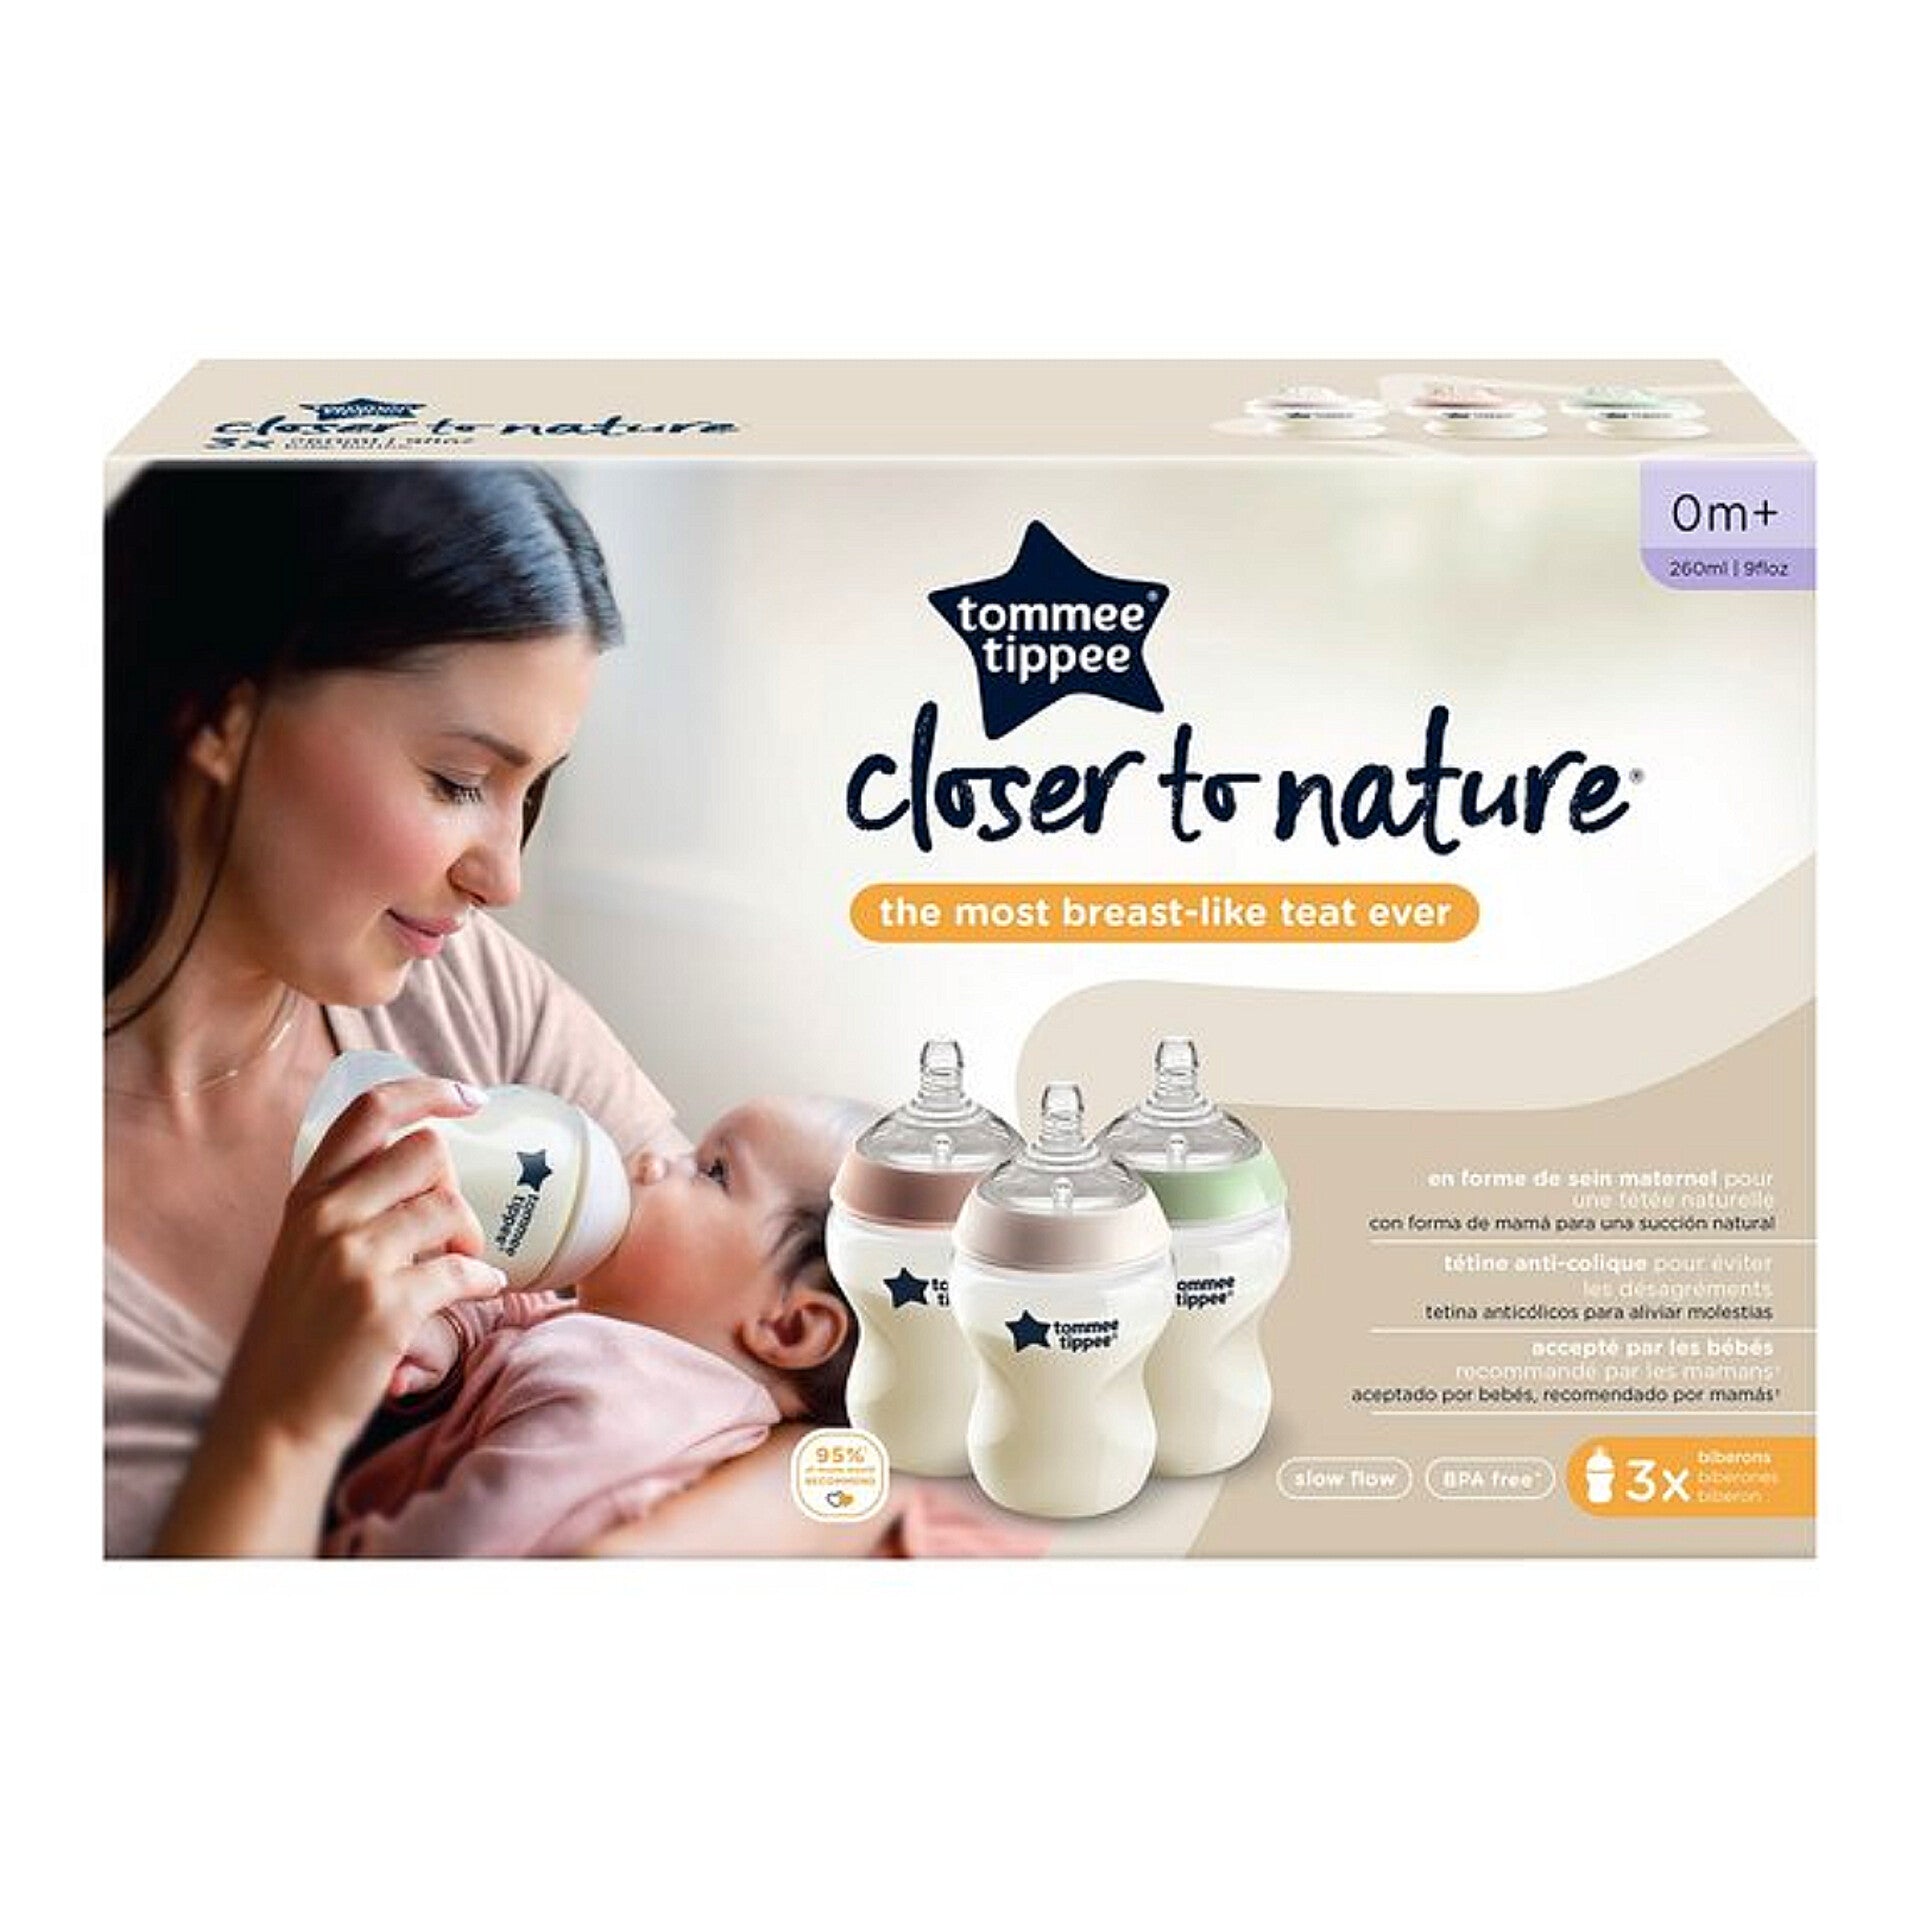 Tommee Tippee Closer To Nature Bottles 0m+ - Diaper Yard Gh